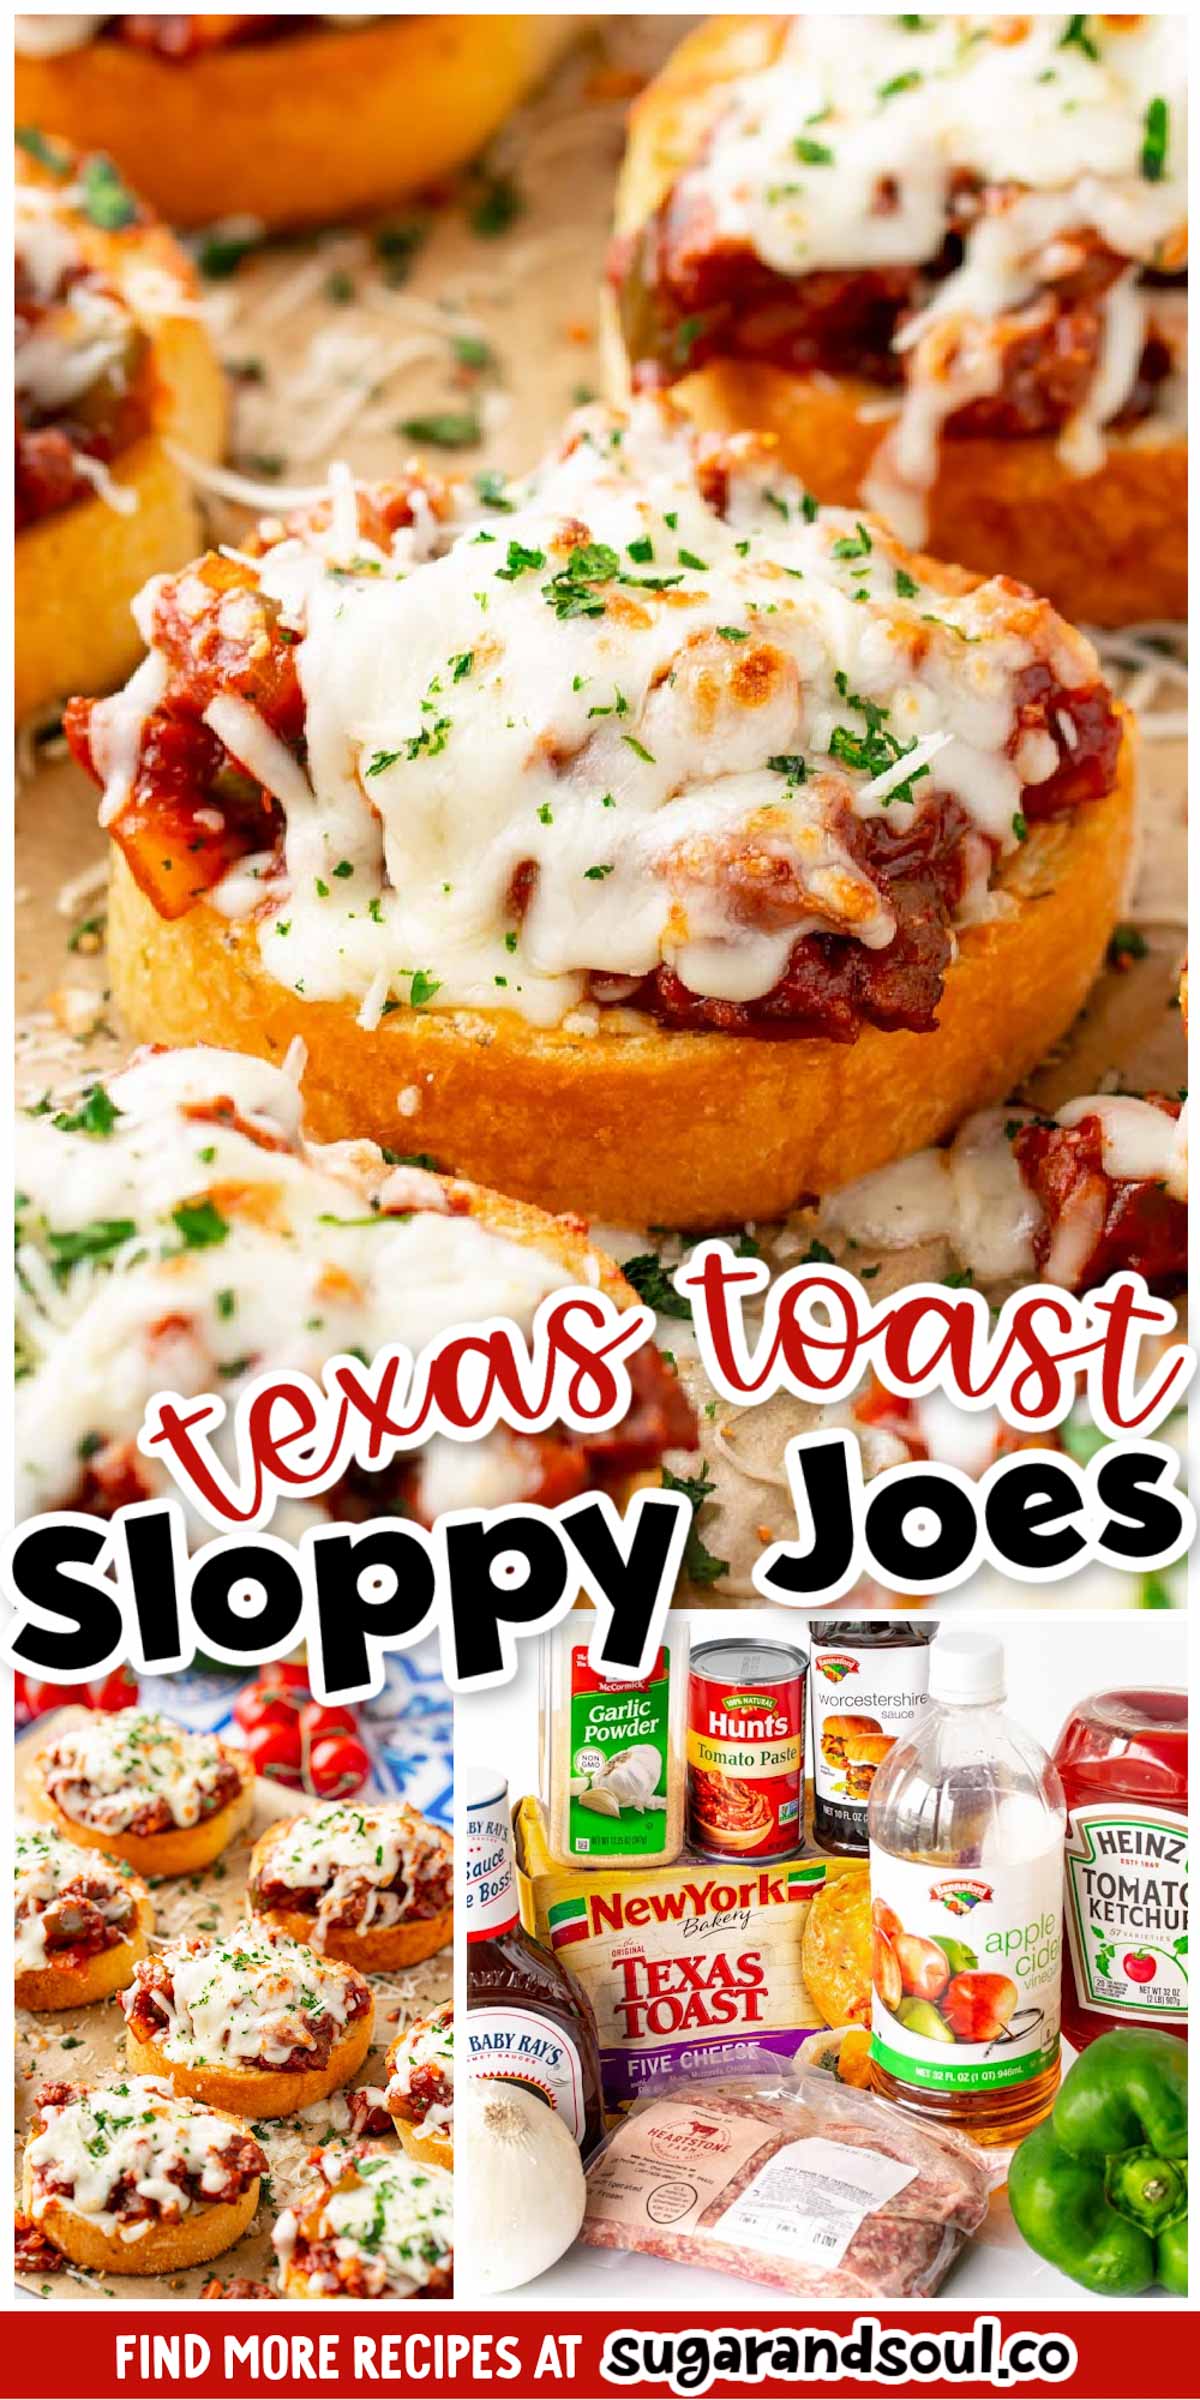 Texas Toast Sloppy Joes is a family favorite meal that serves zesty homemade sloppy joe sauce over garlicky, crunchy Texas Toast! A quick and delicious dinner option that's ready in only 35 minutes! via @sugarandsoulco